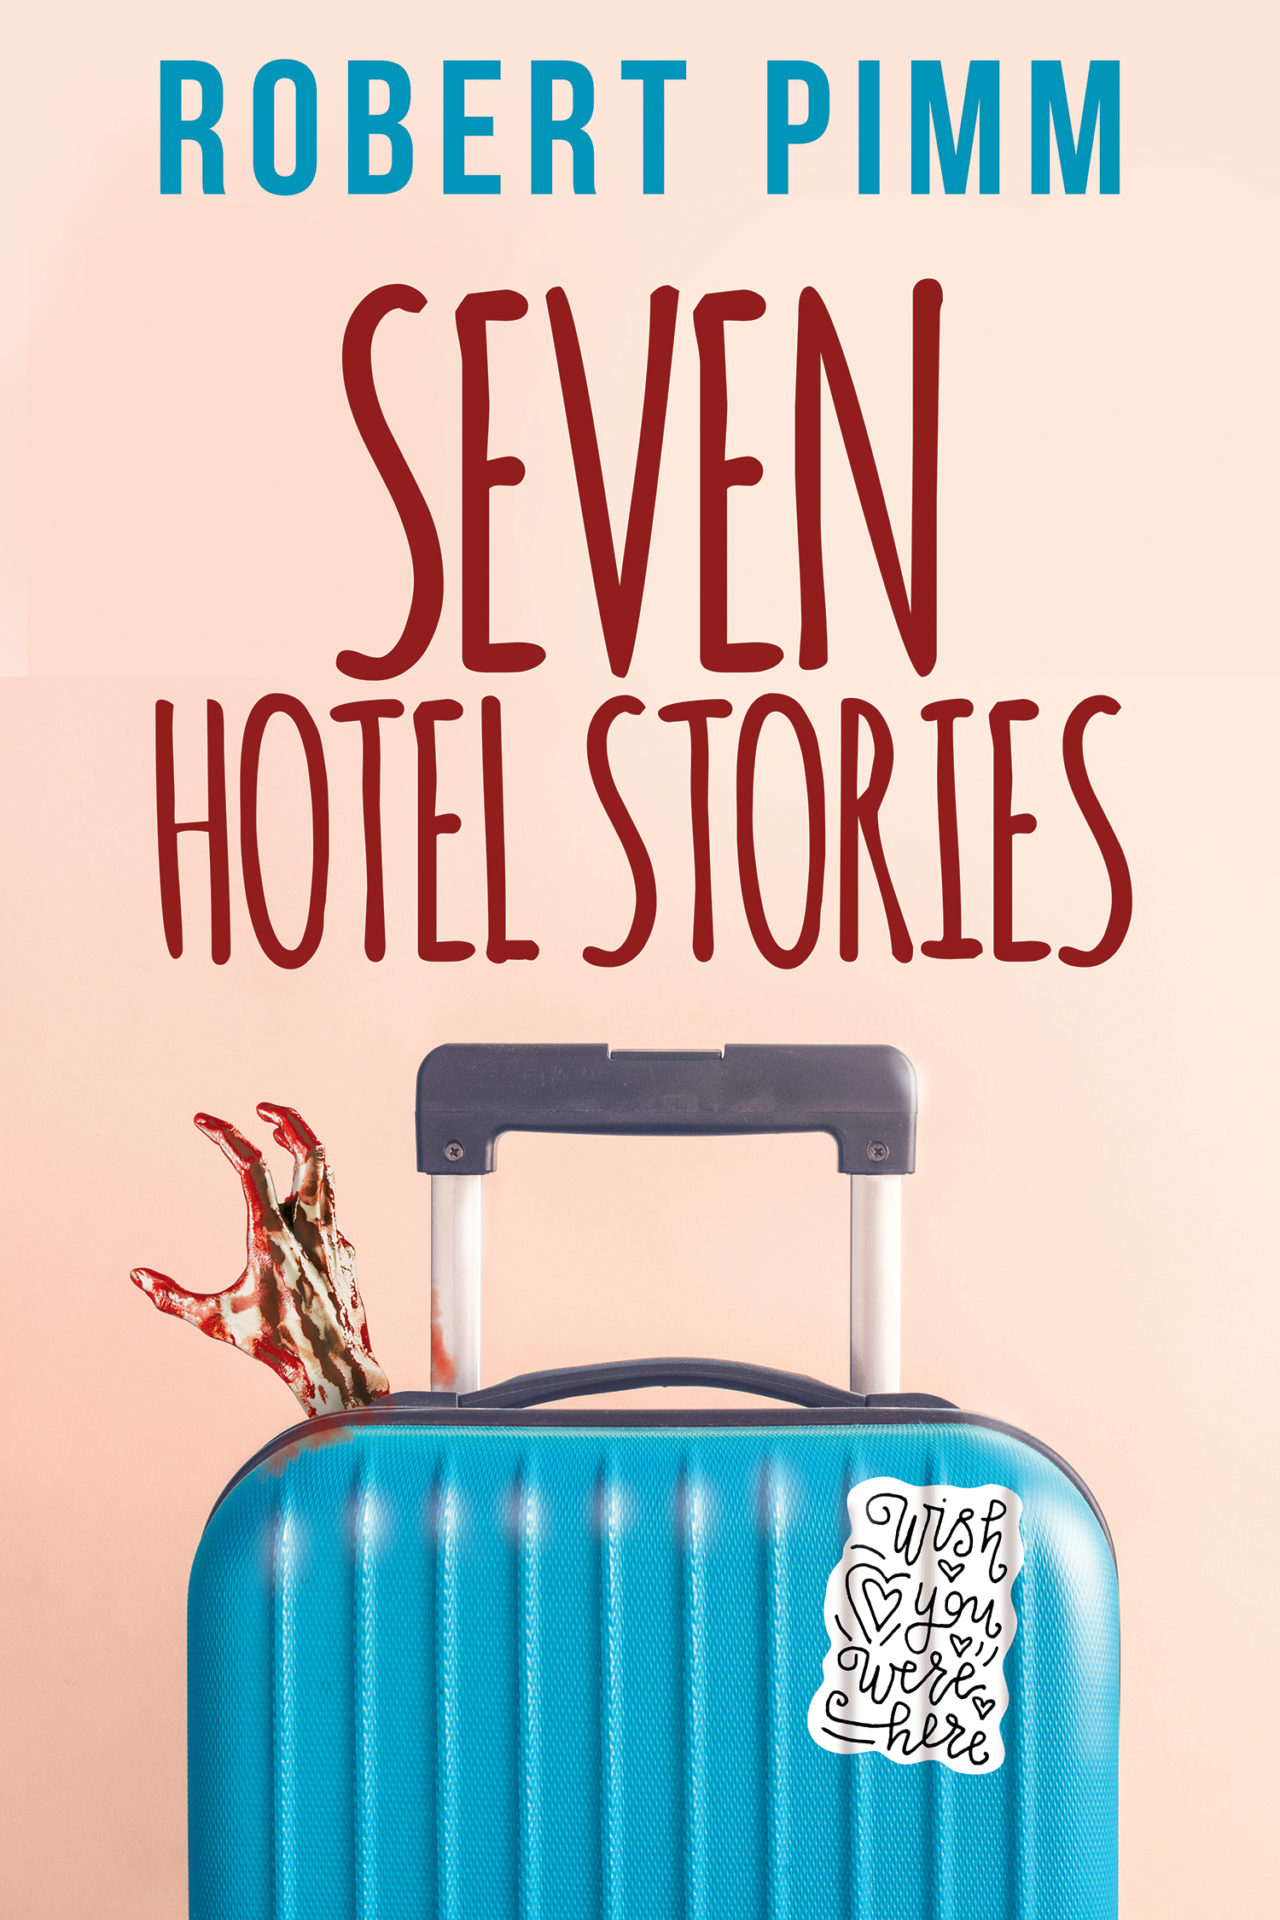 Link to Seven Hotel Stories on Amazon